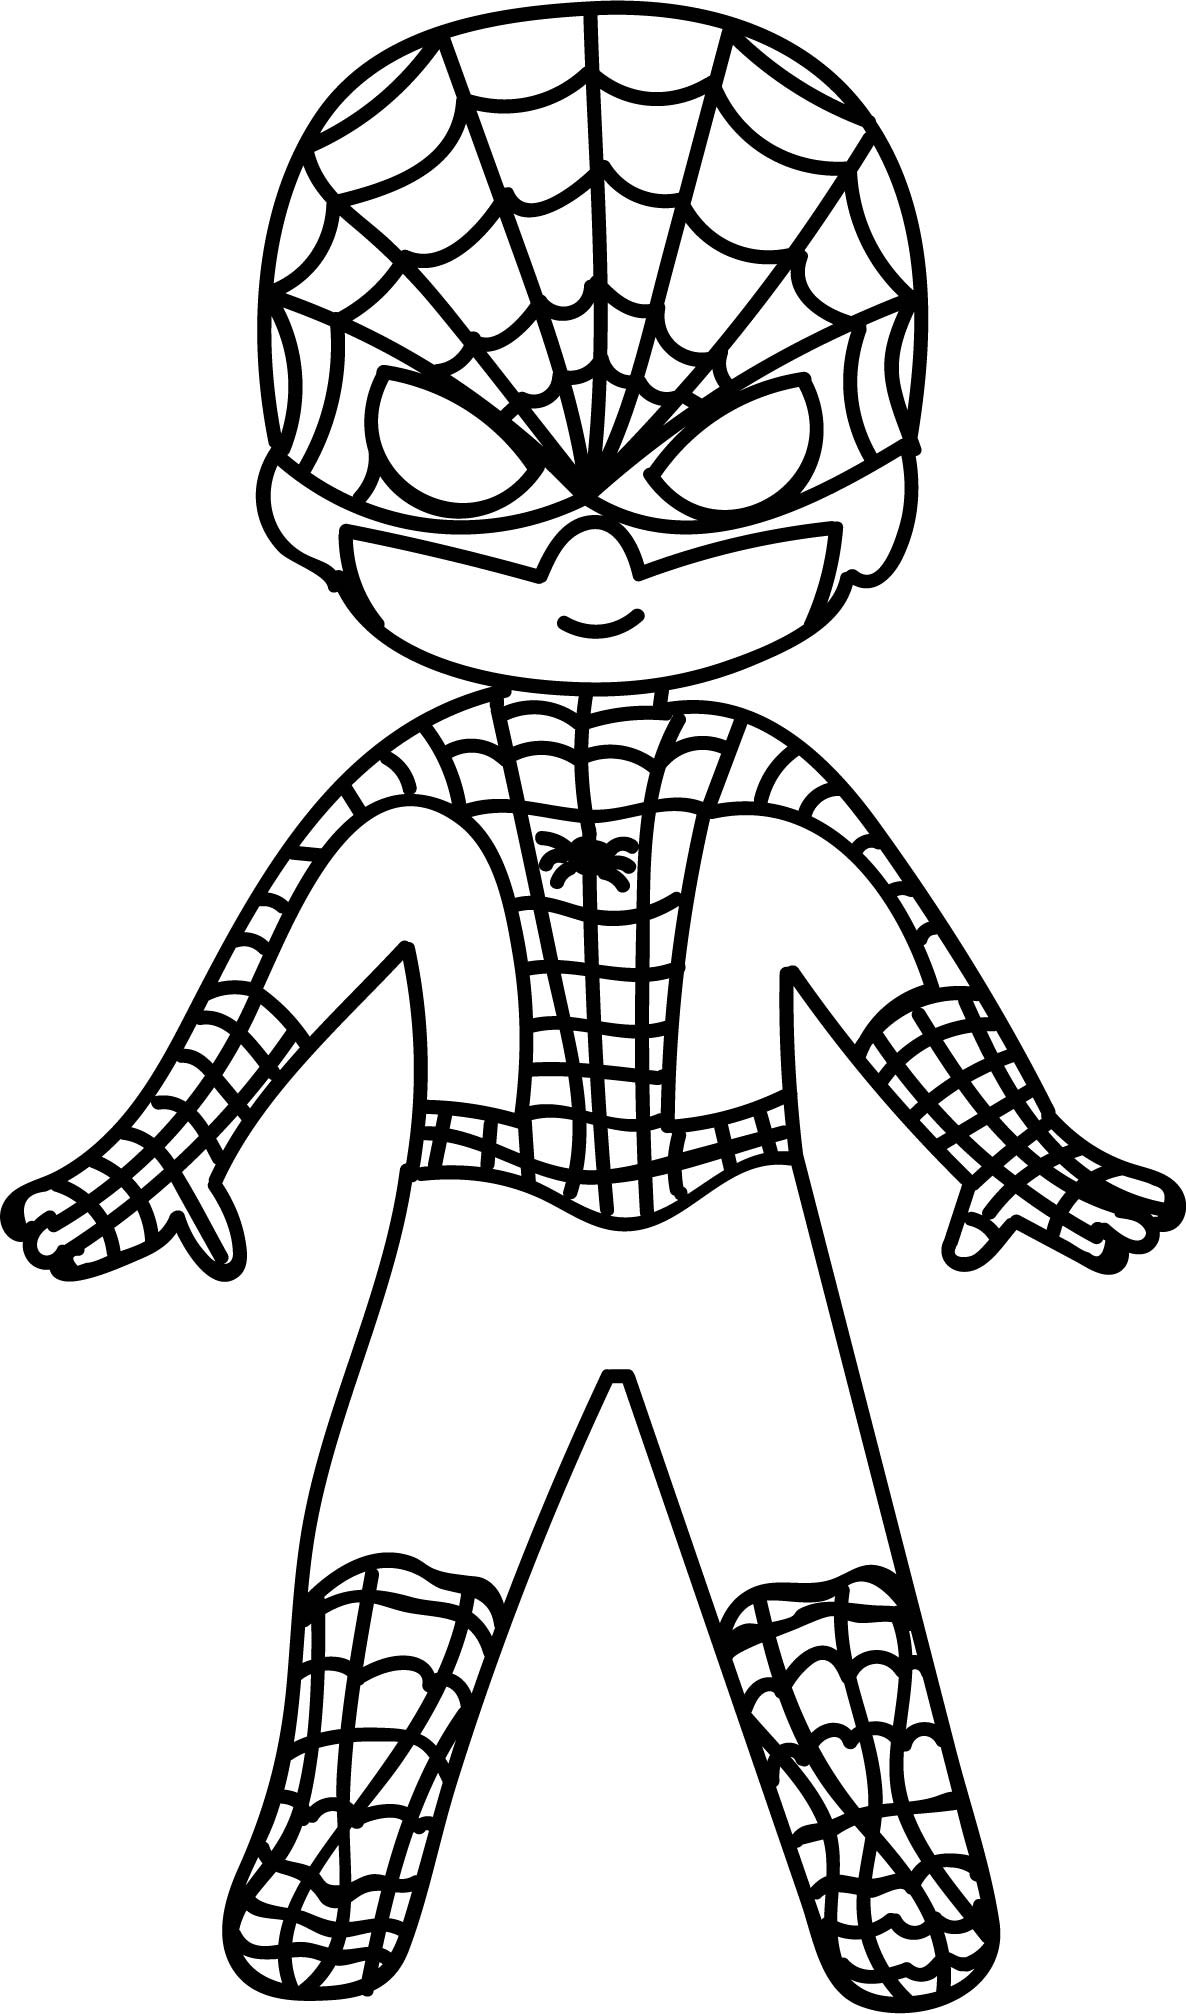 Spiderman Coloring Pages For Toddlers
 Waiting Cartoon Superhero Spiderman Kid Coloring Page